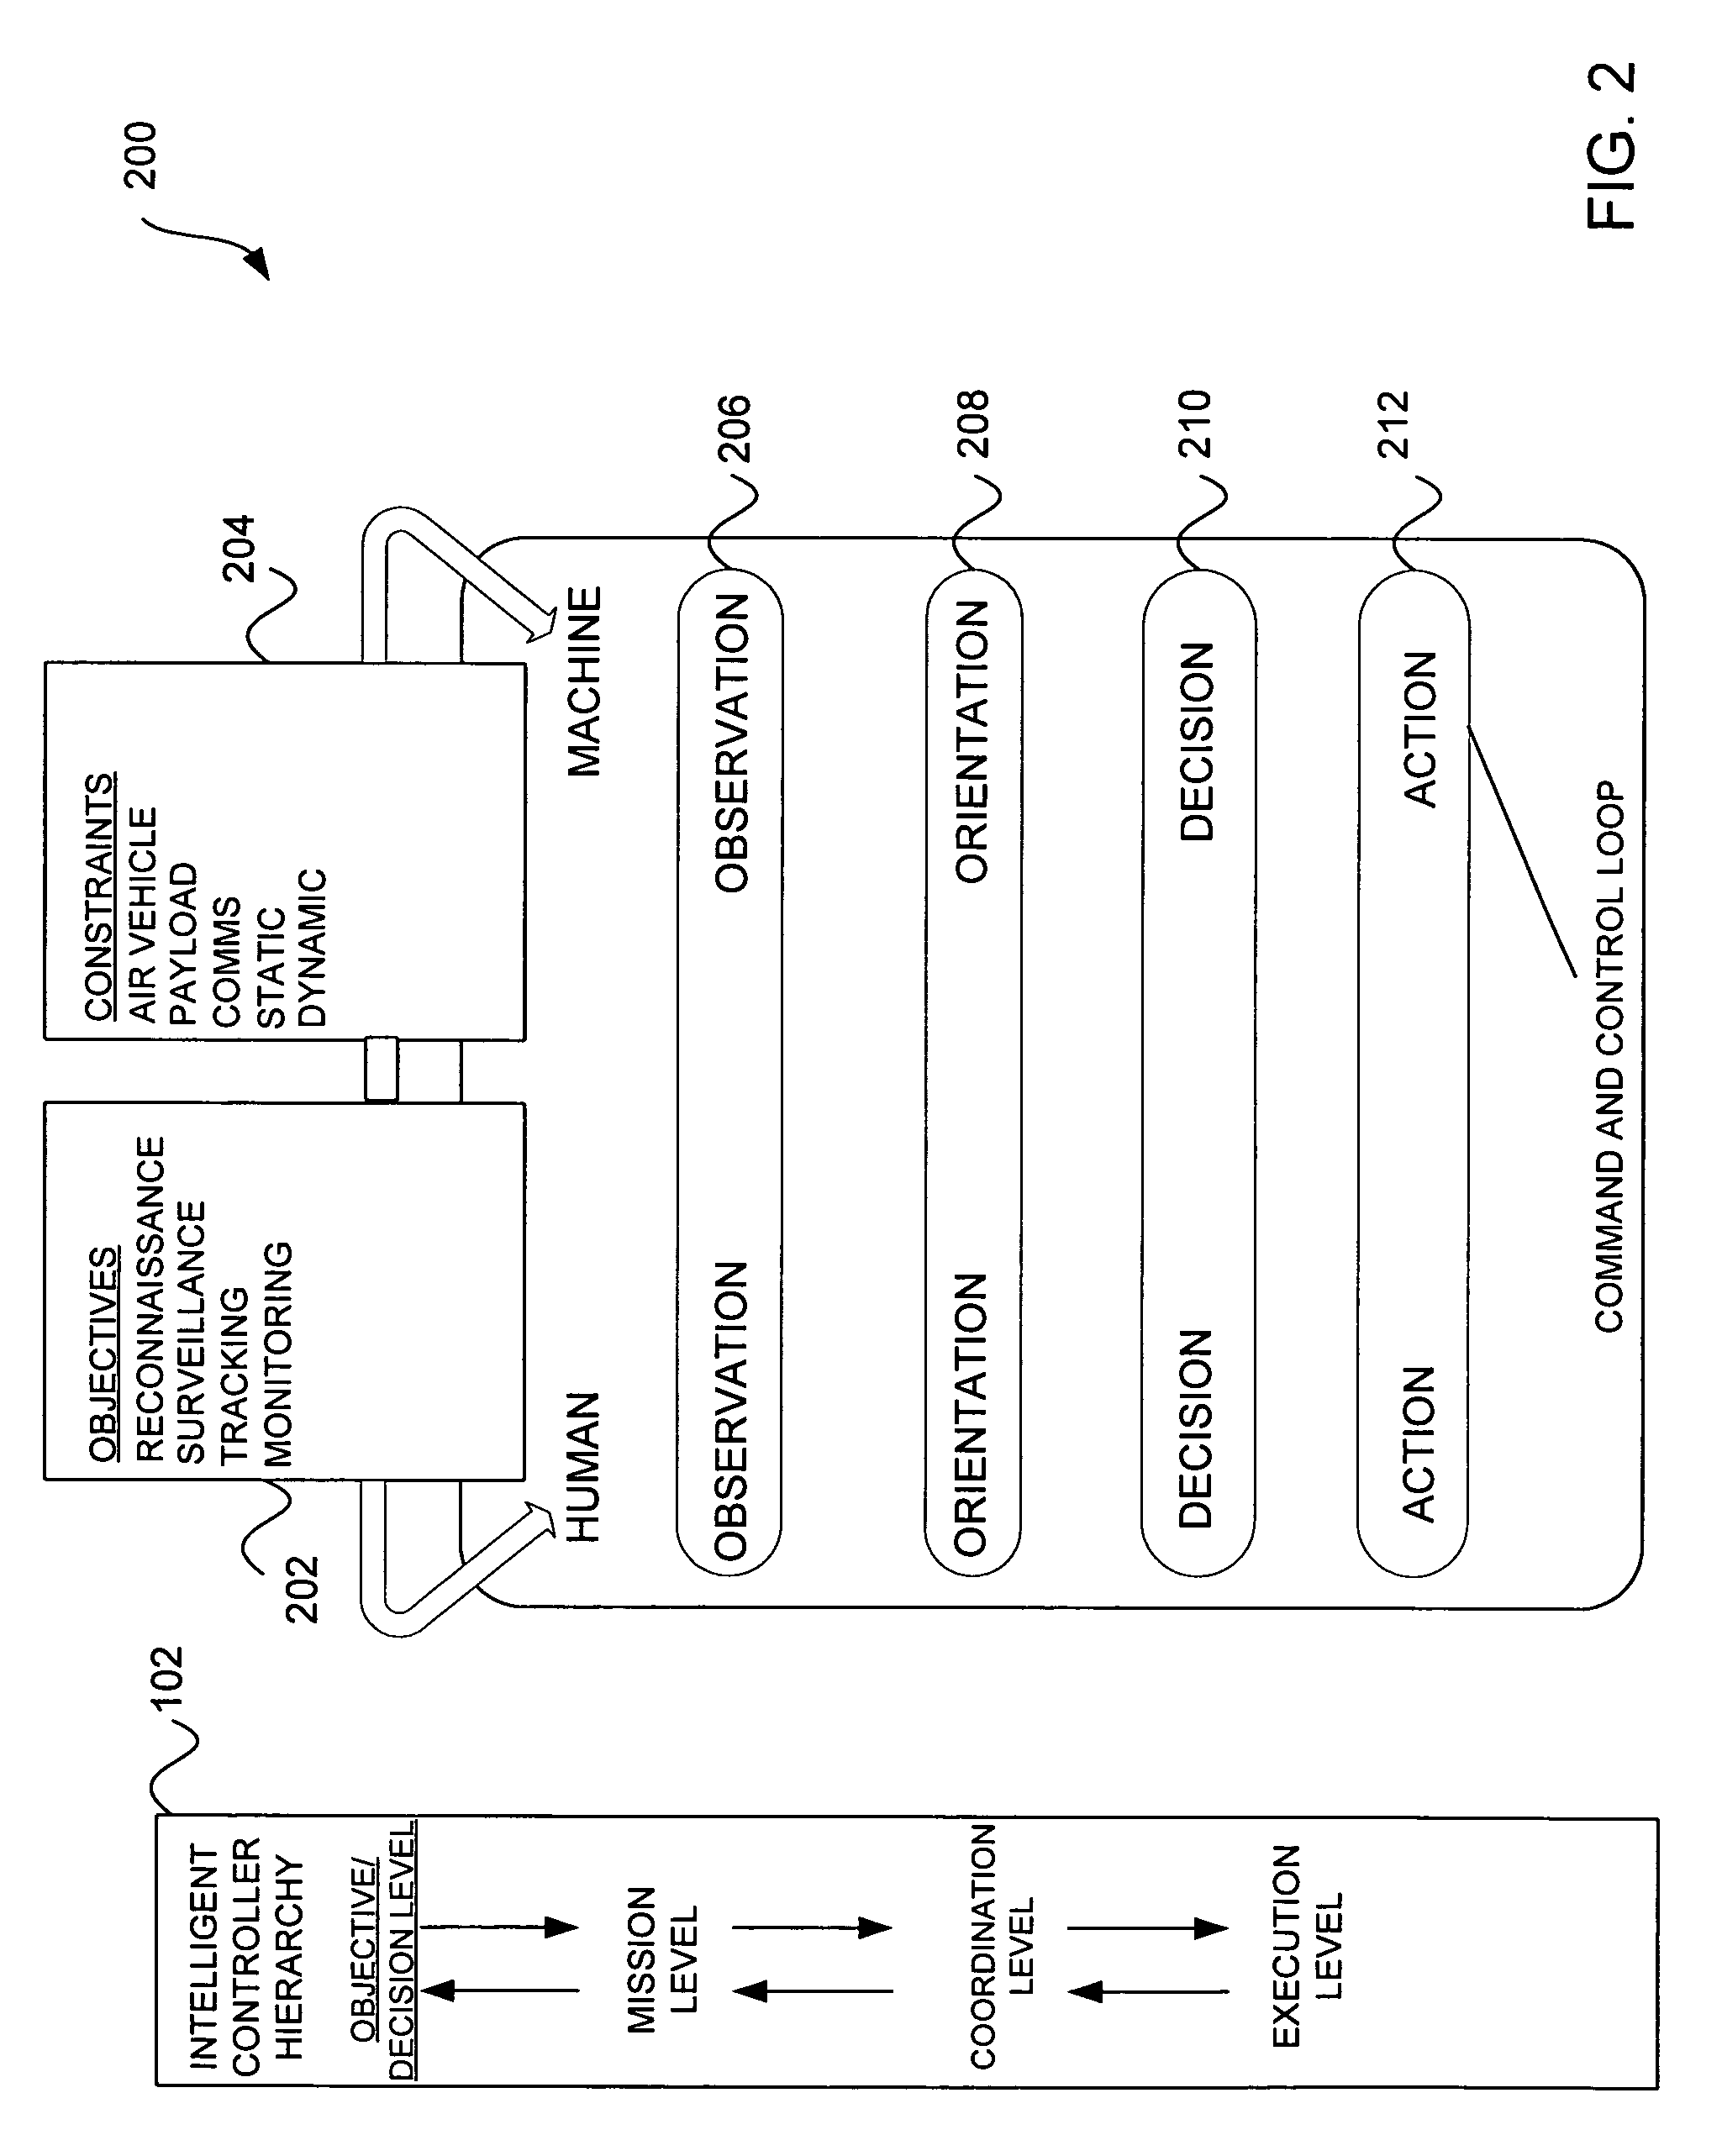 Vehicle control system including related methods and components